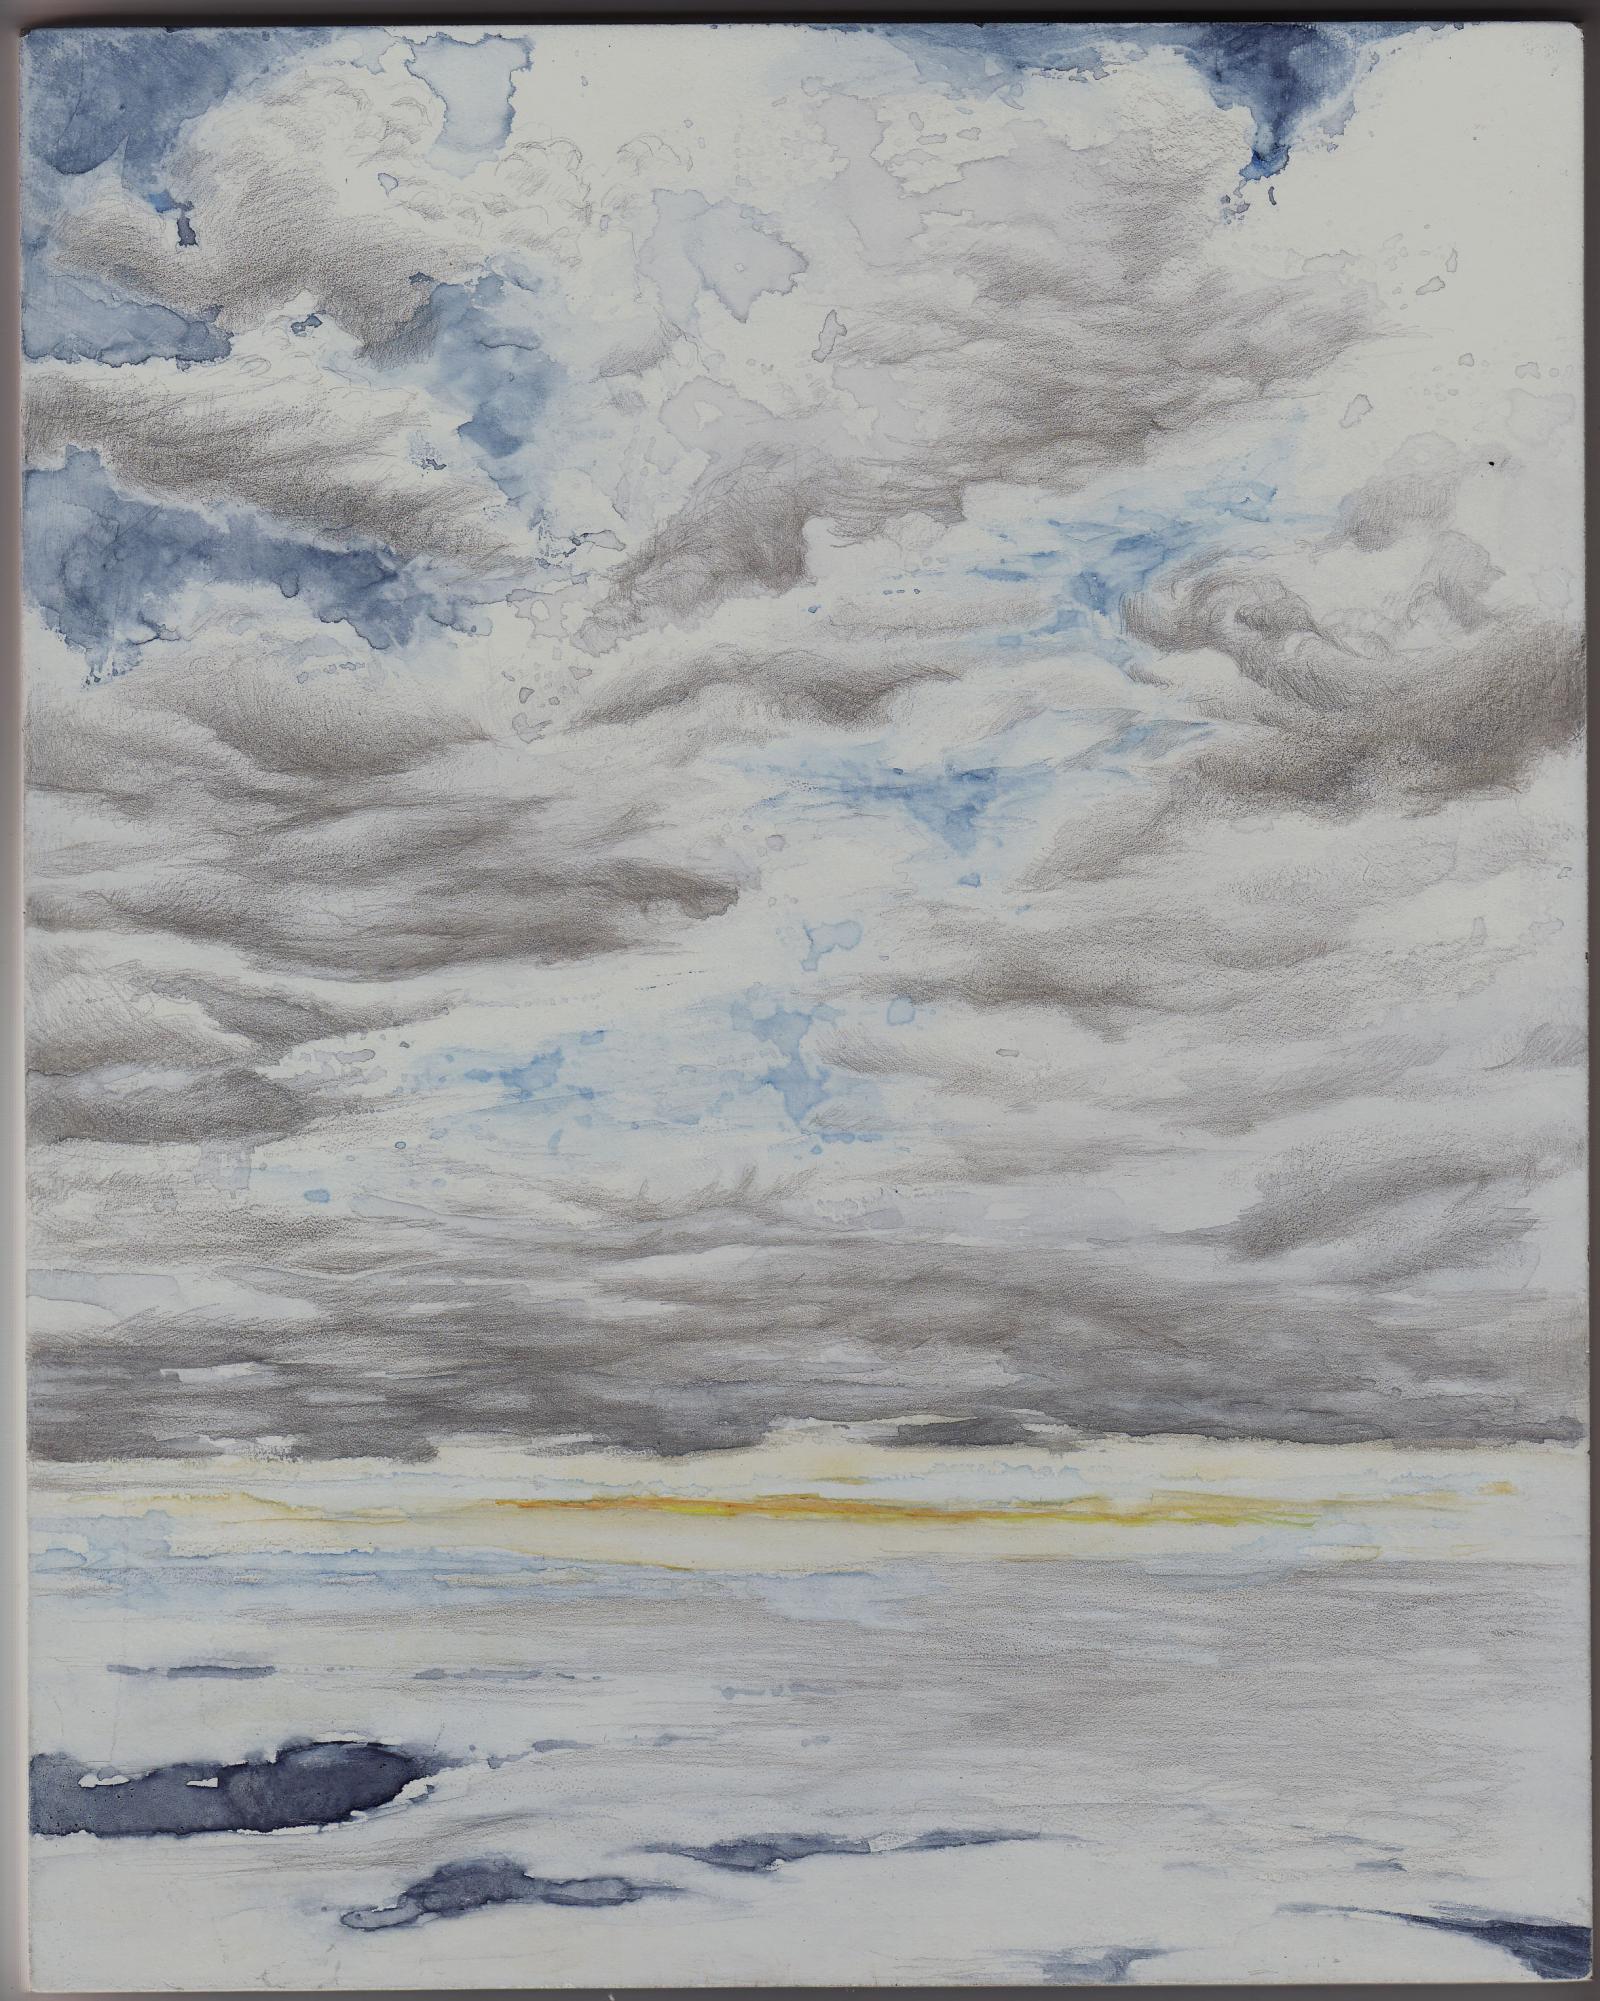 This work is on a prepared panel using silverpoint drawing methods fine silver and watercolor.  